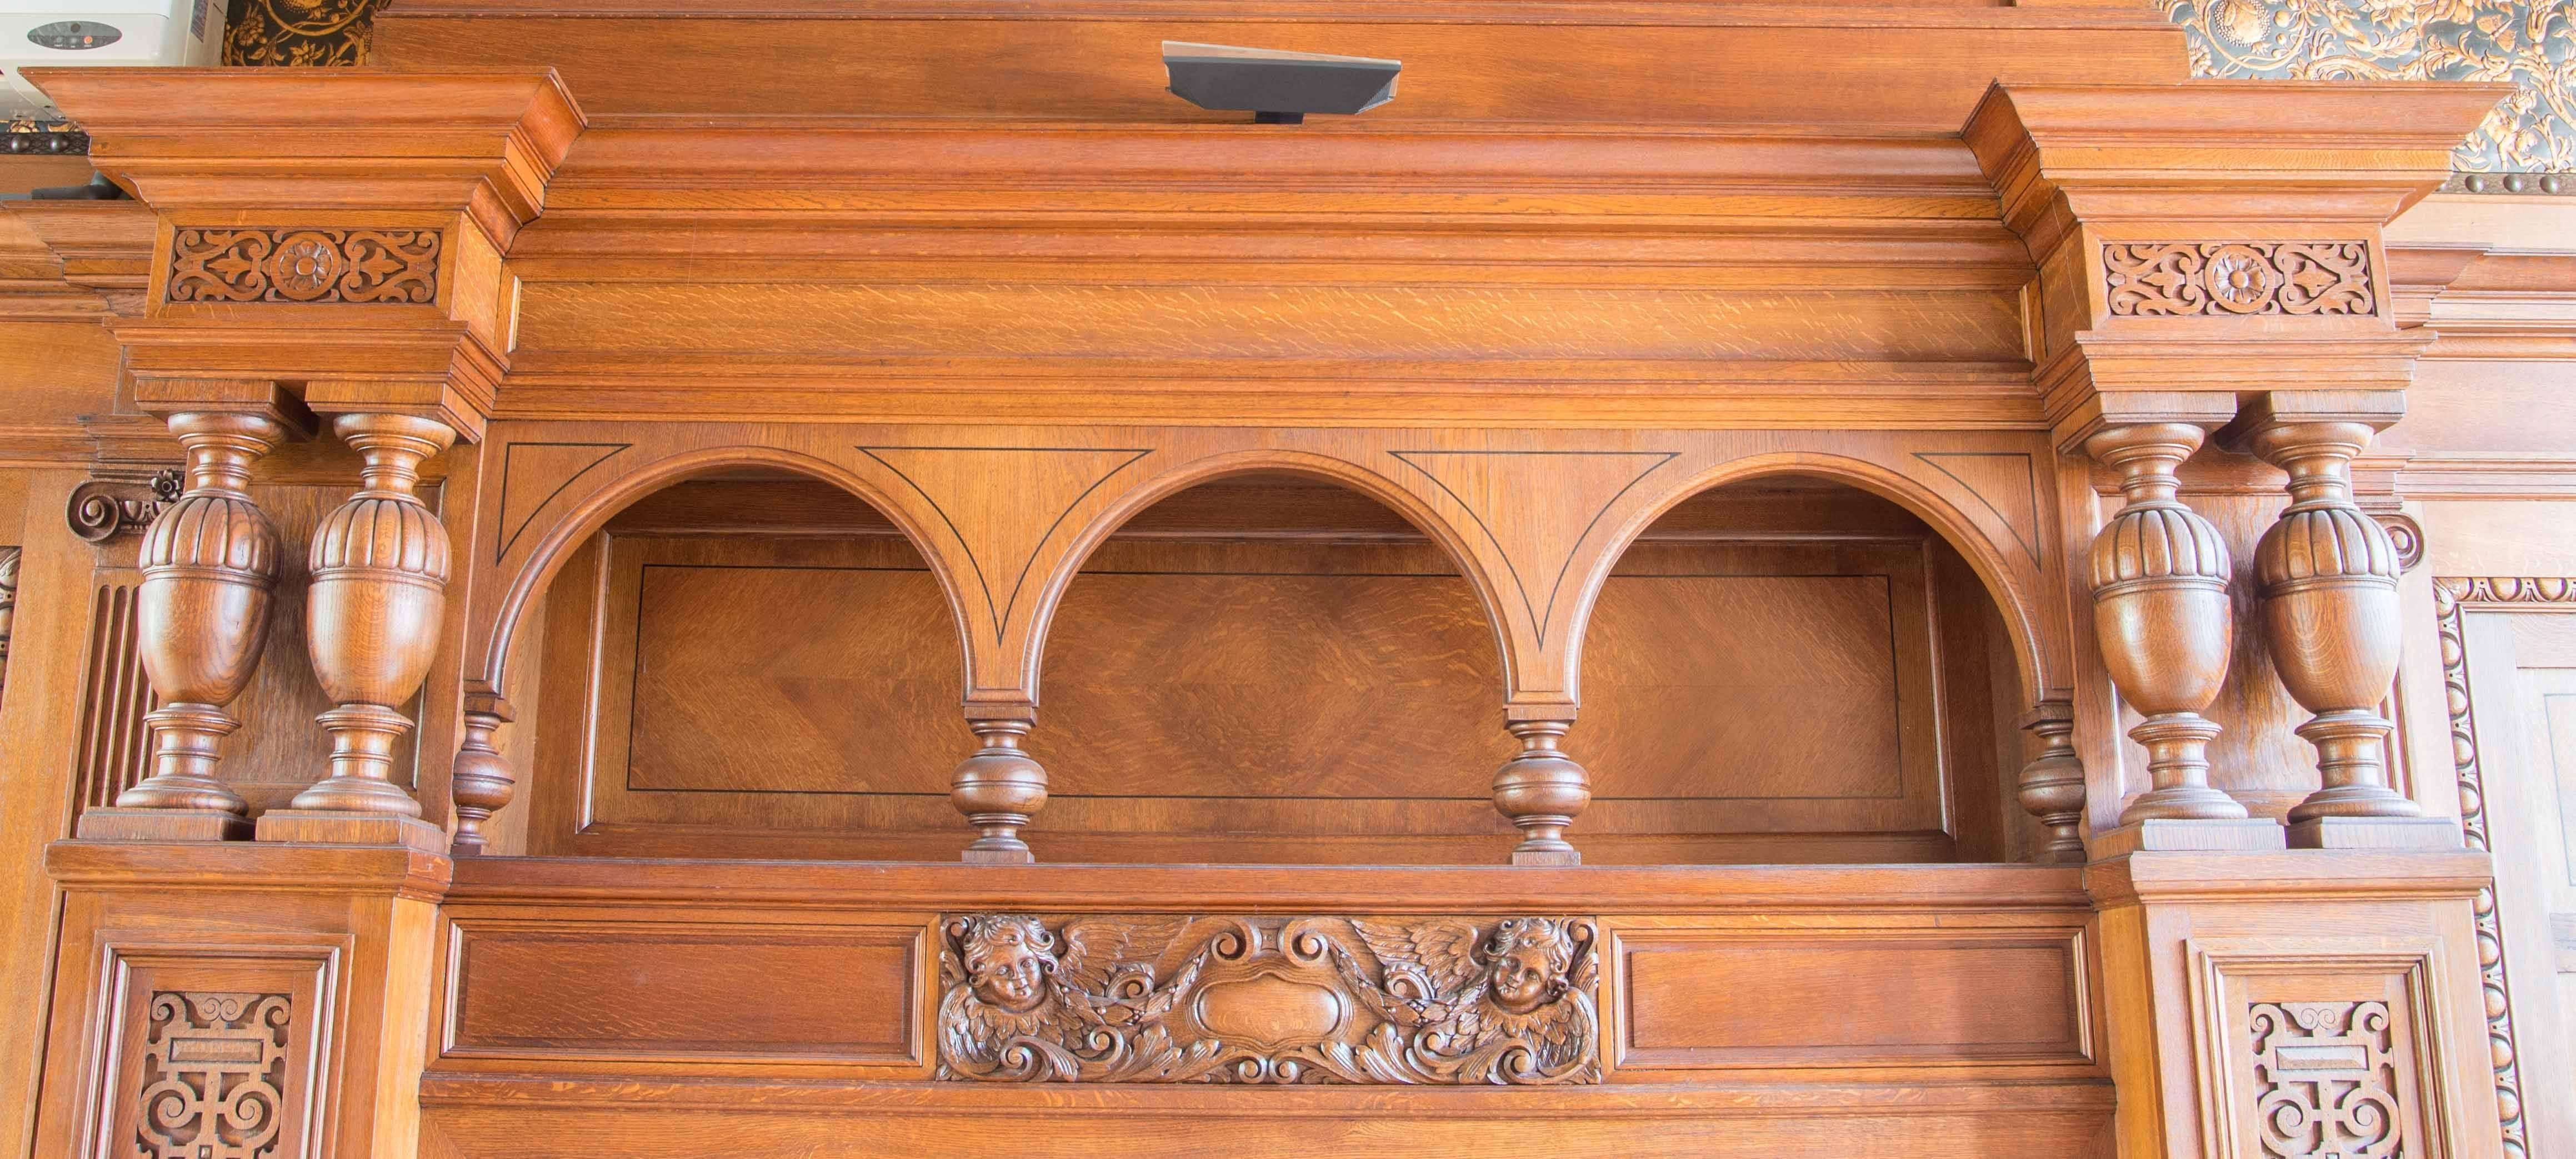 This impressive antique fireplace surround is from Belgium and it dates to the early 1900s. It was salvaged from a chateau in Flanders, Belgium. This is a premium quality surround in excellent condition. It is constructed from solid, quarter-sawn